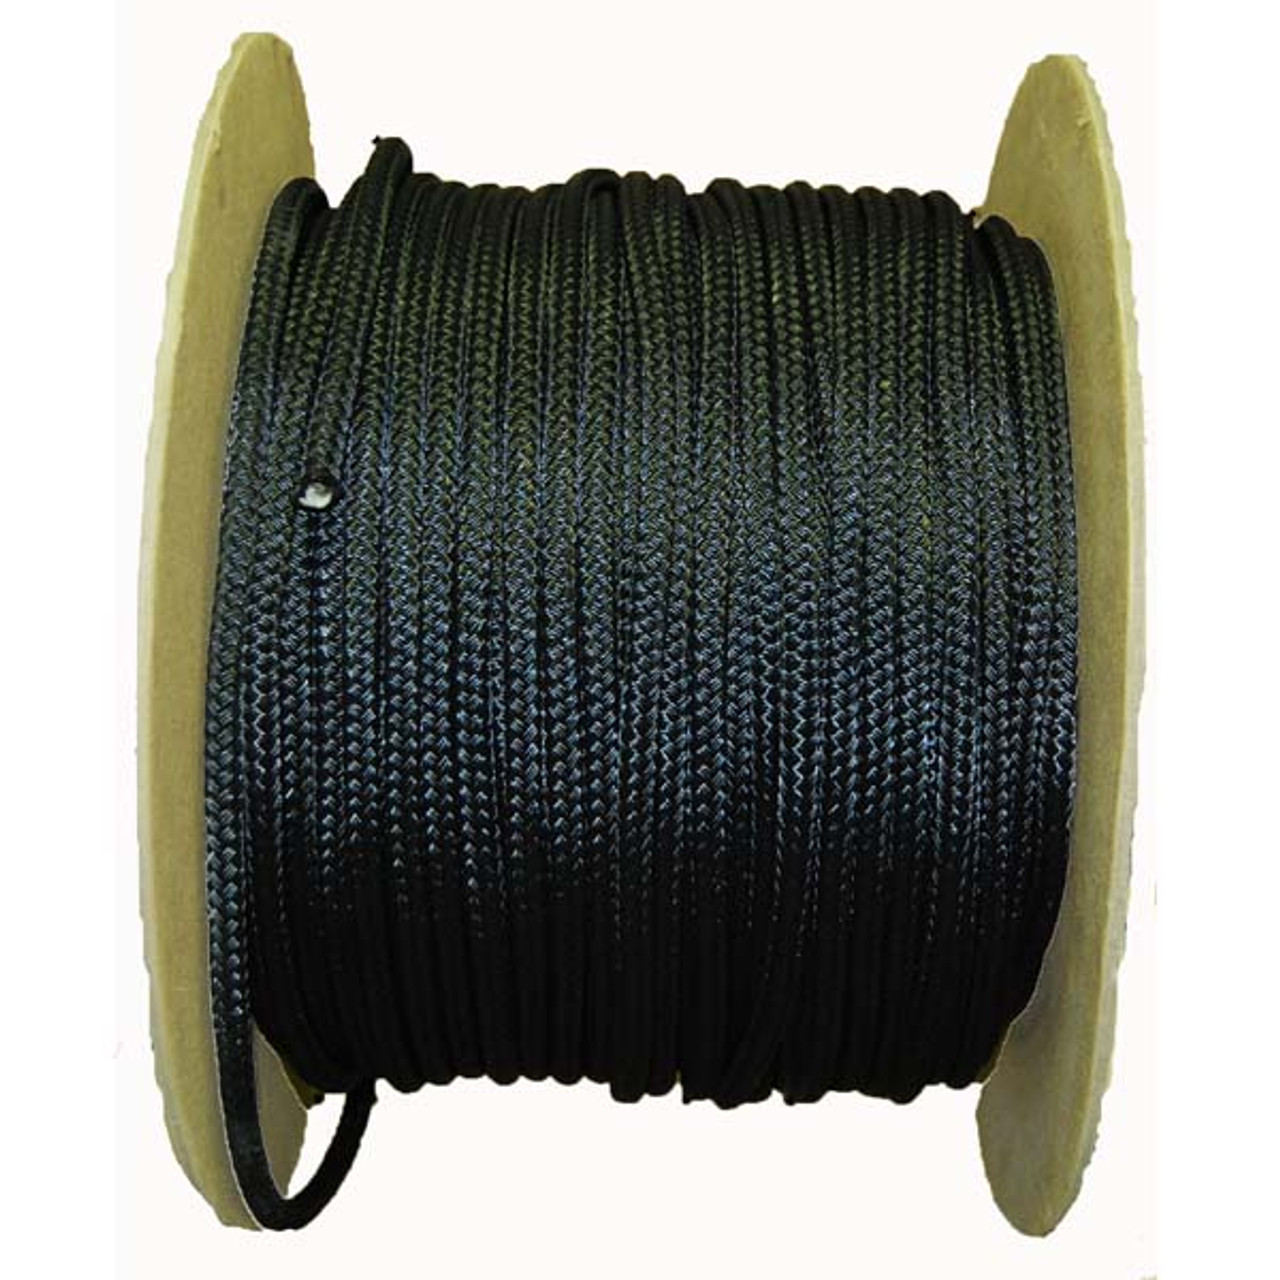 Aamstrand Double Braided Nylon Rope - Black - Per Foot